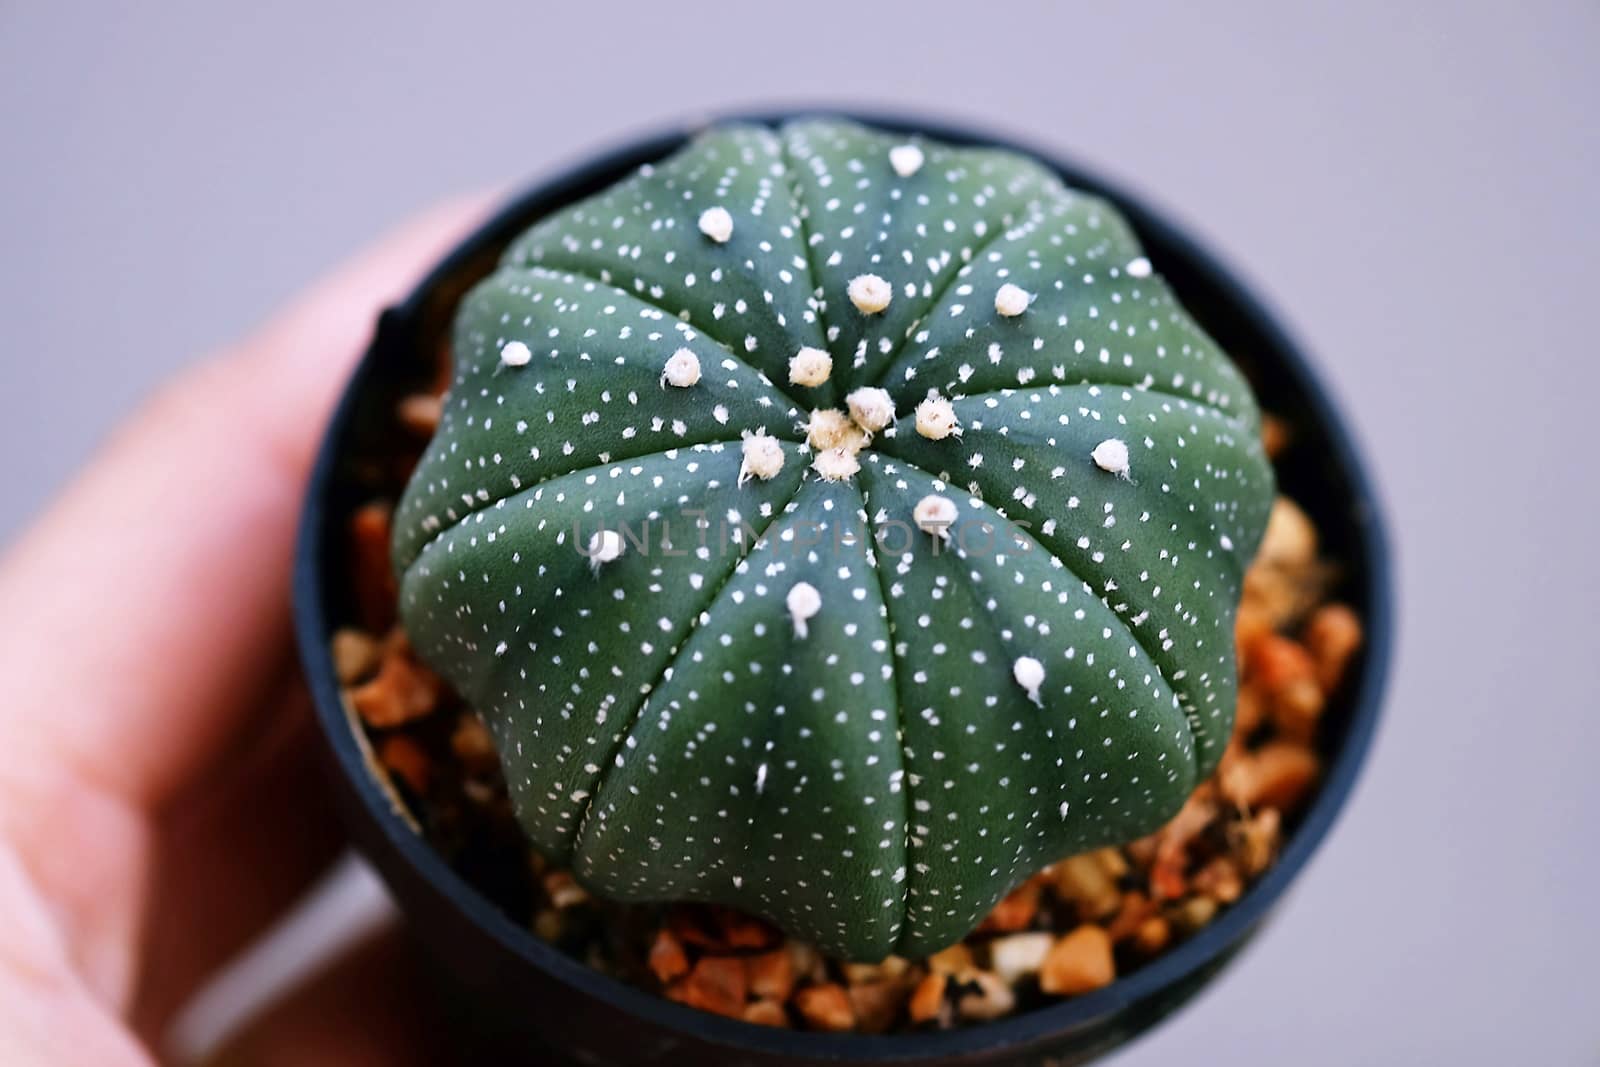 Handful of Close Up Astrophytum asterias Cactus by aonip